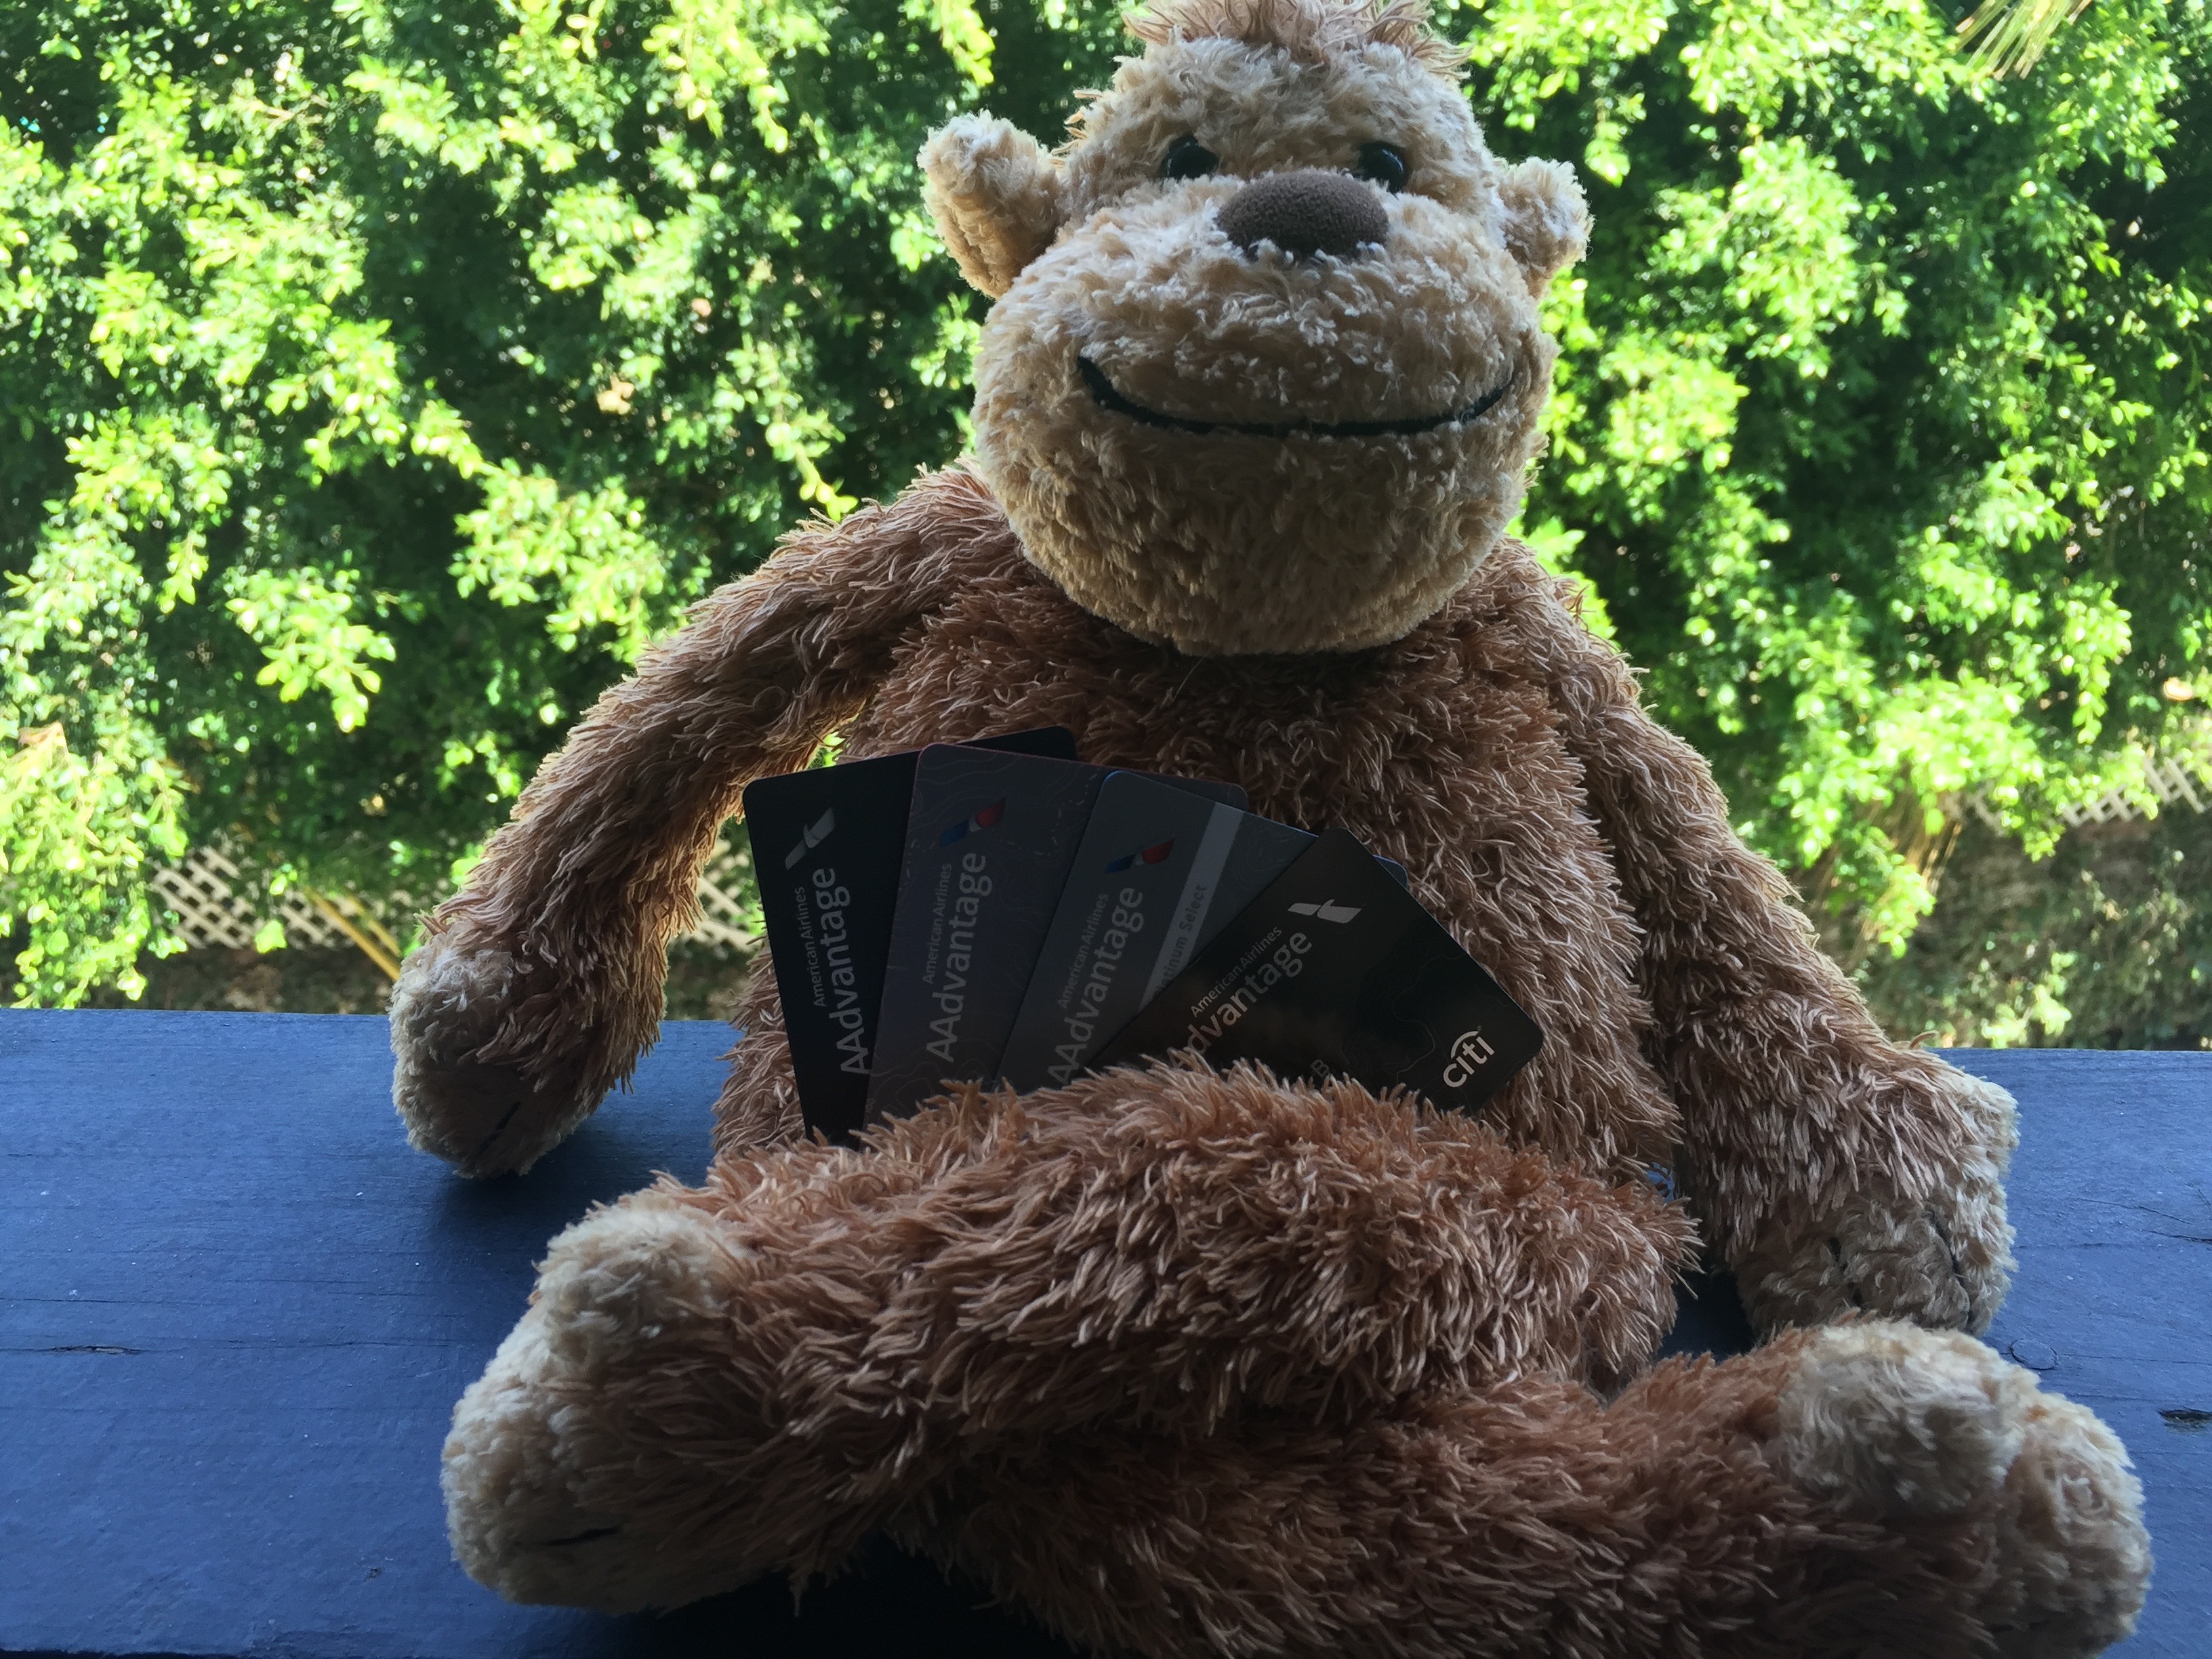 a stuffed monkey holding several cards